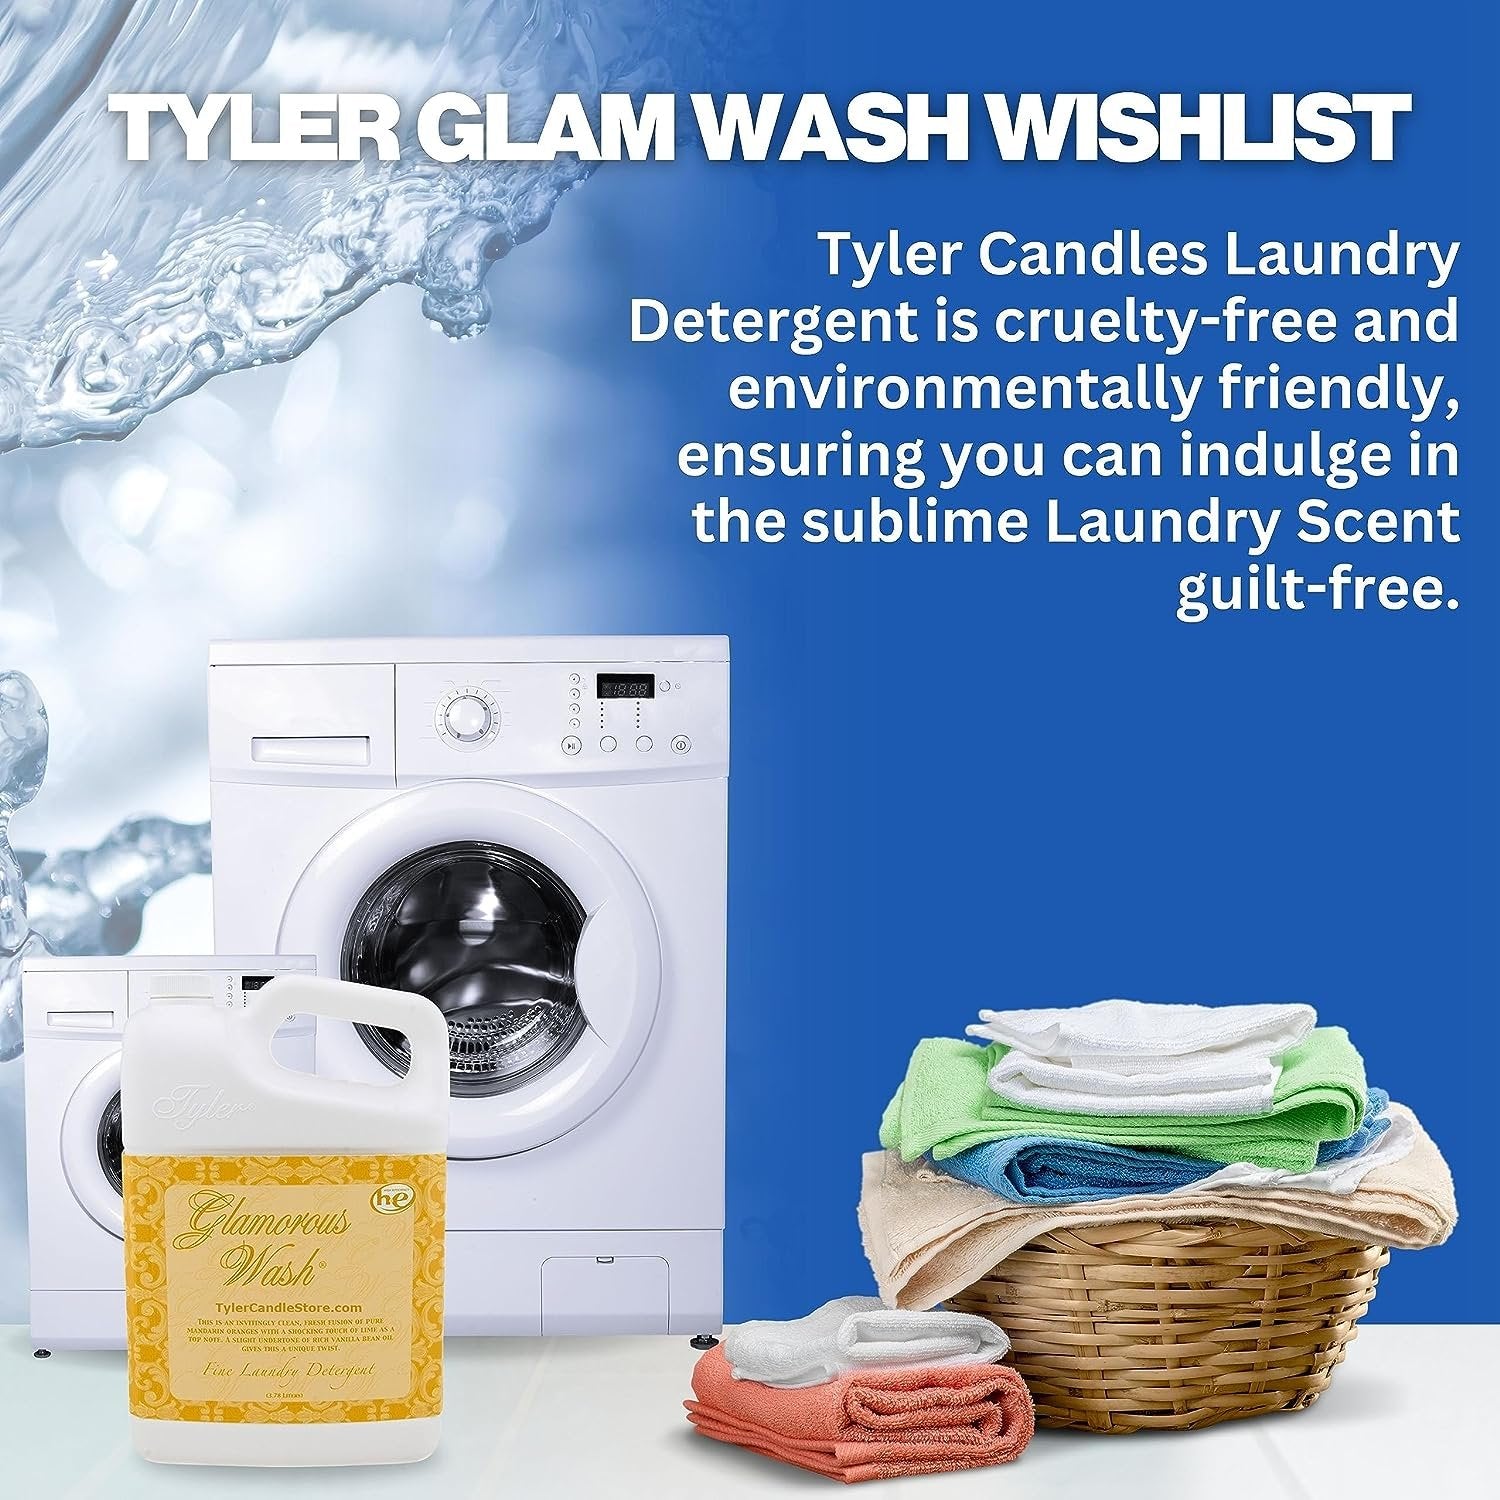 Worldwide Nutrition Bundle: Tyler Glamorous Wash Wishlist Scent Fine Laundry Liquid Detergent - Hand and Machine Washable - 3.78L (1Gallon) Container and Multi-Purpose Key Chain